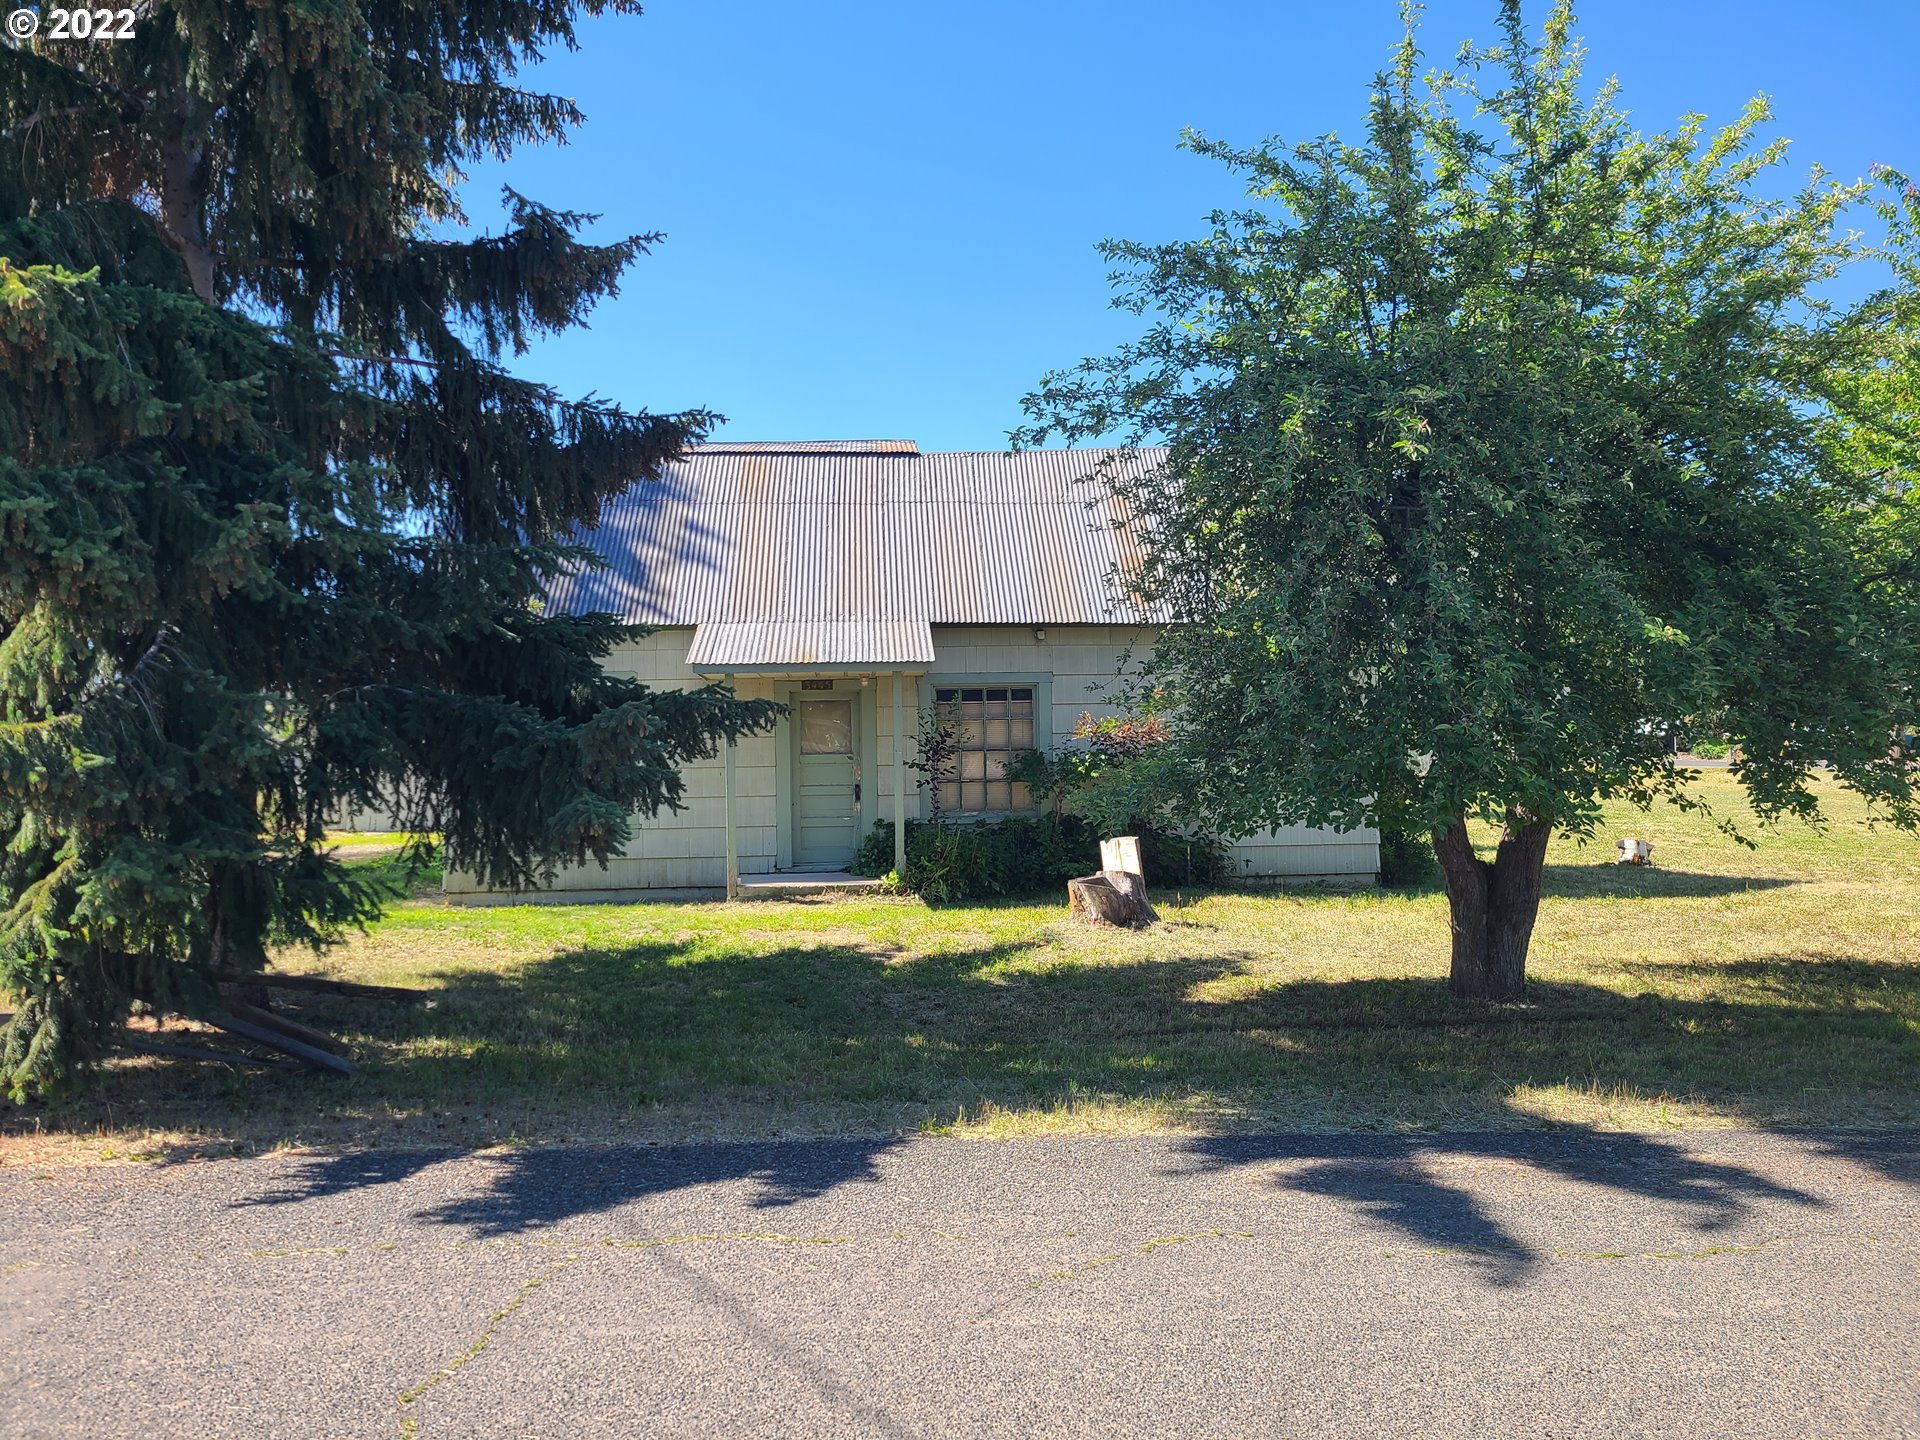 Amazing potential with a little TLC. Great location on the West side of town. Oversized 16,000 sq. ft corner lot with plenty of room for a nice big shop, garden, rv parking, etc. Great investment opportunity. Must see property.